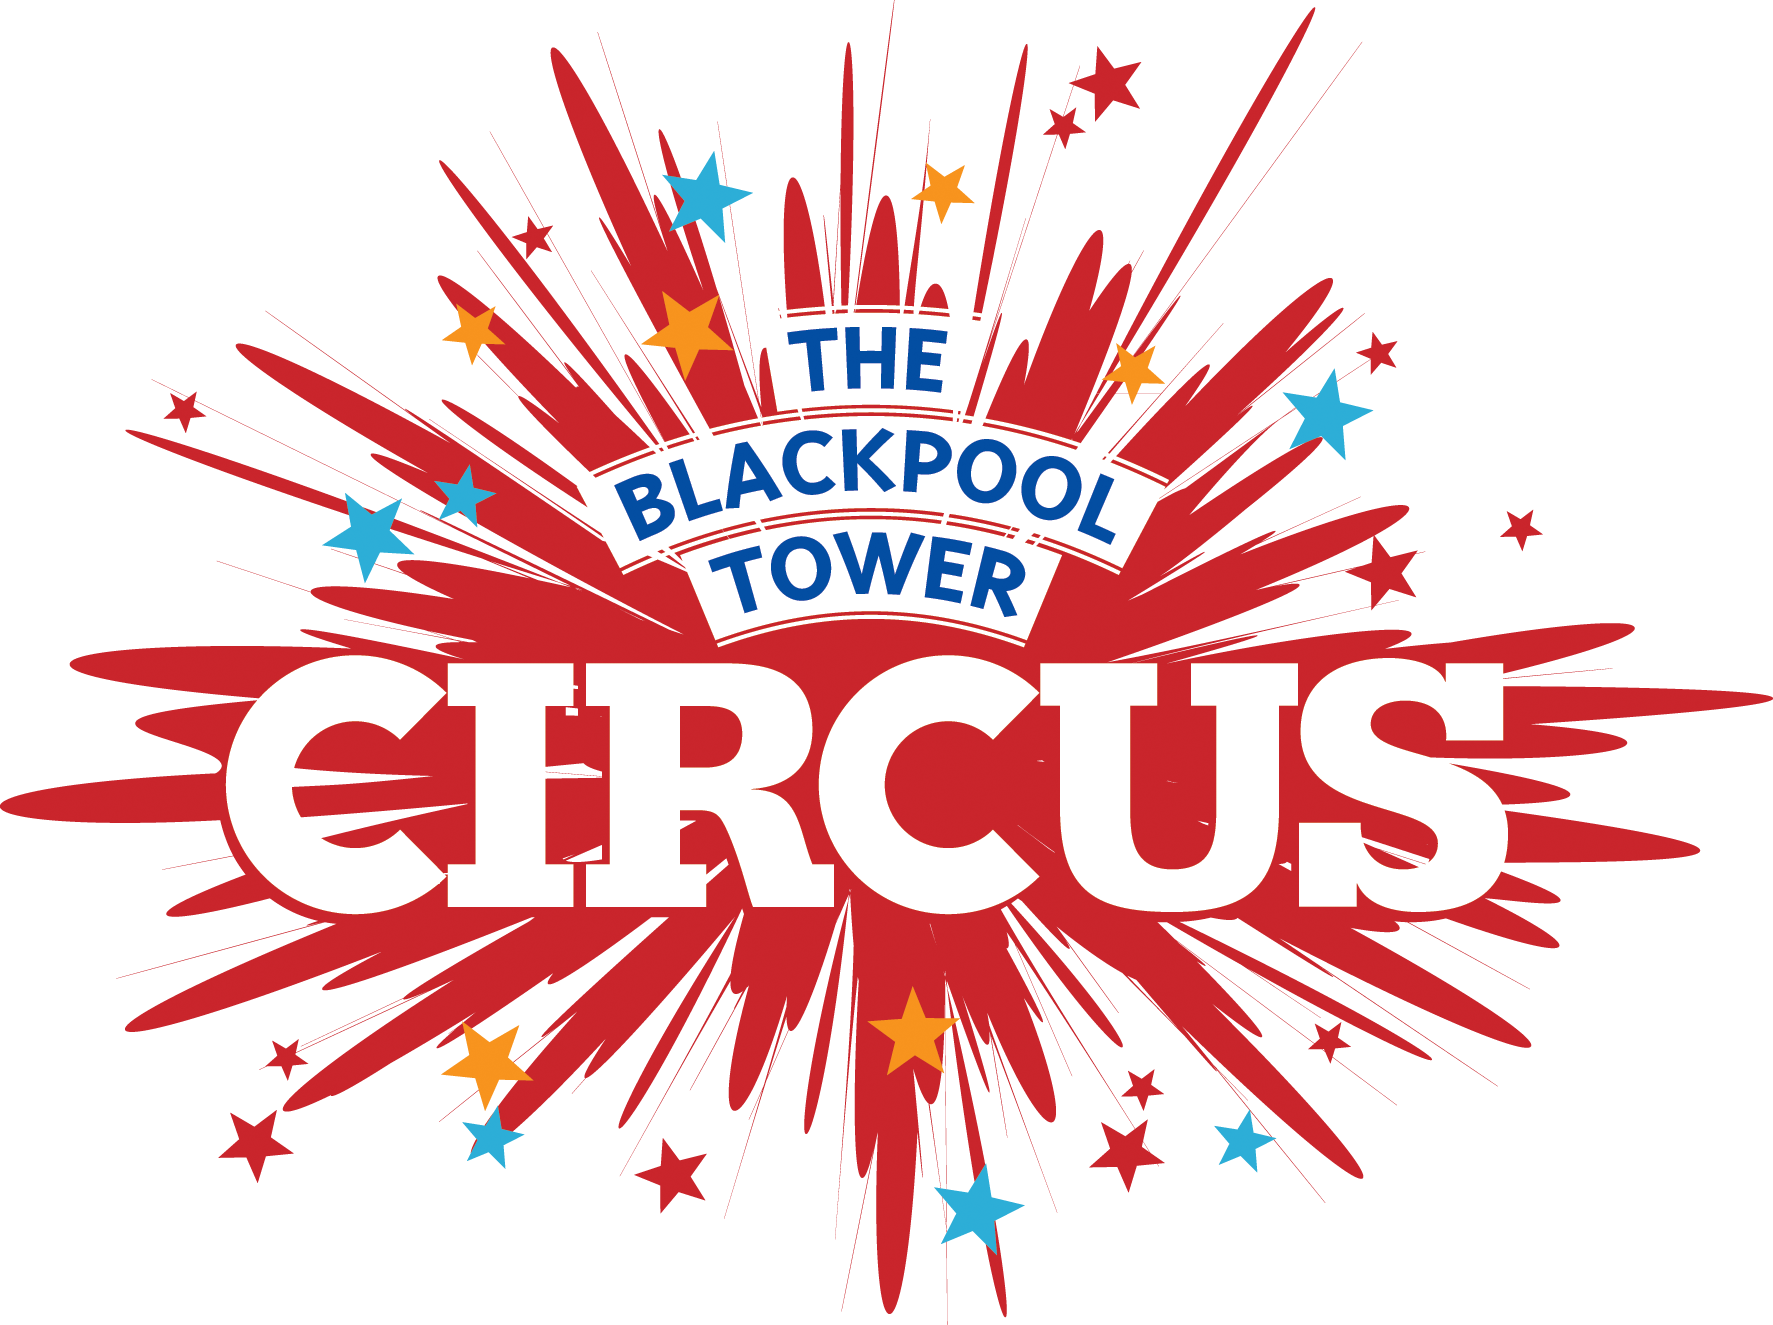 The Blackpool Tower Official - Circus Blackpool (1773x1325)